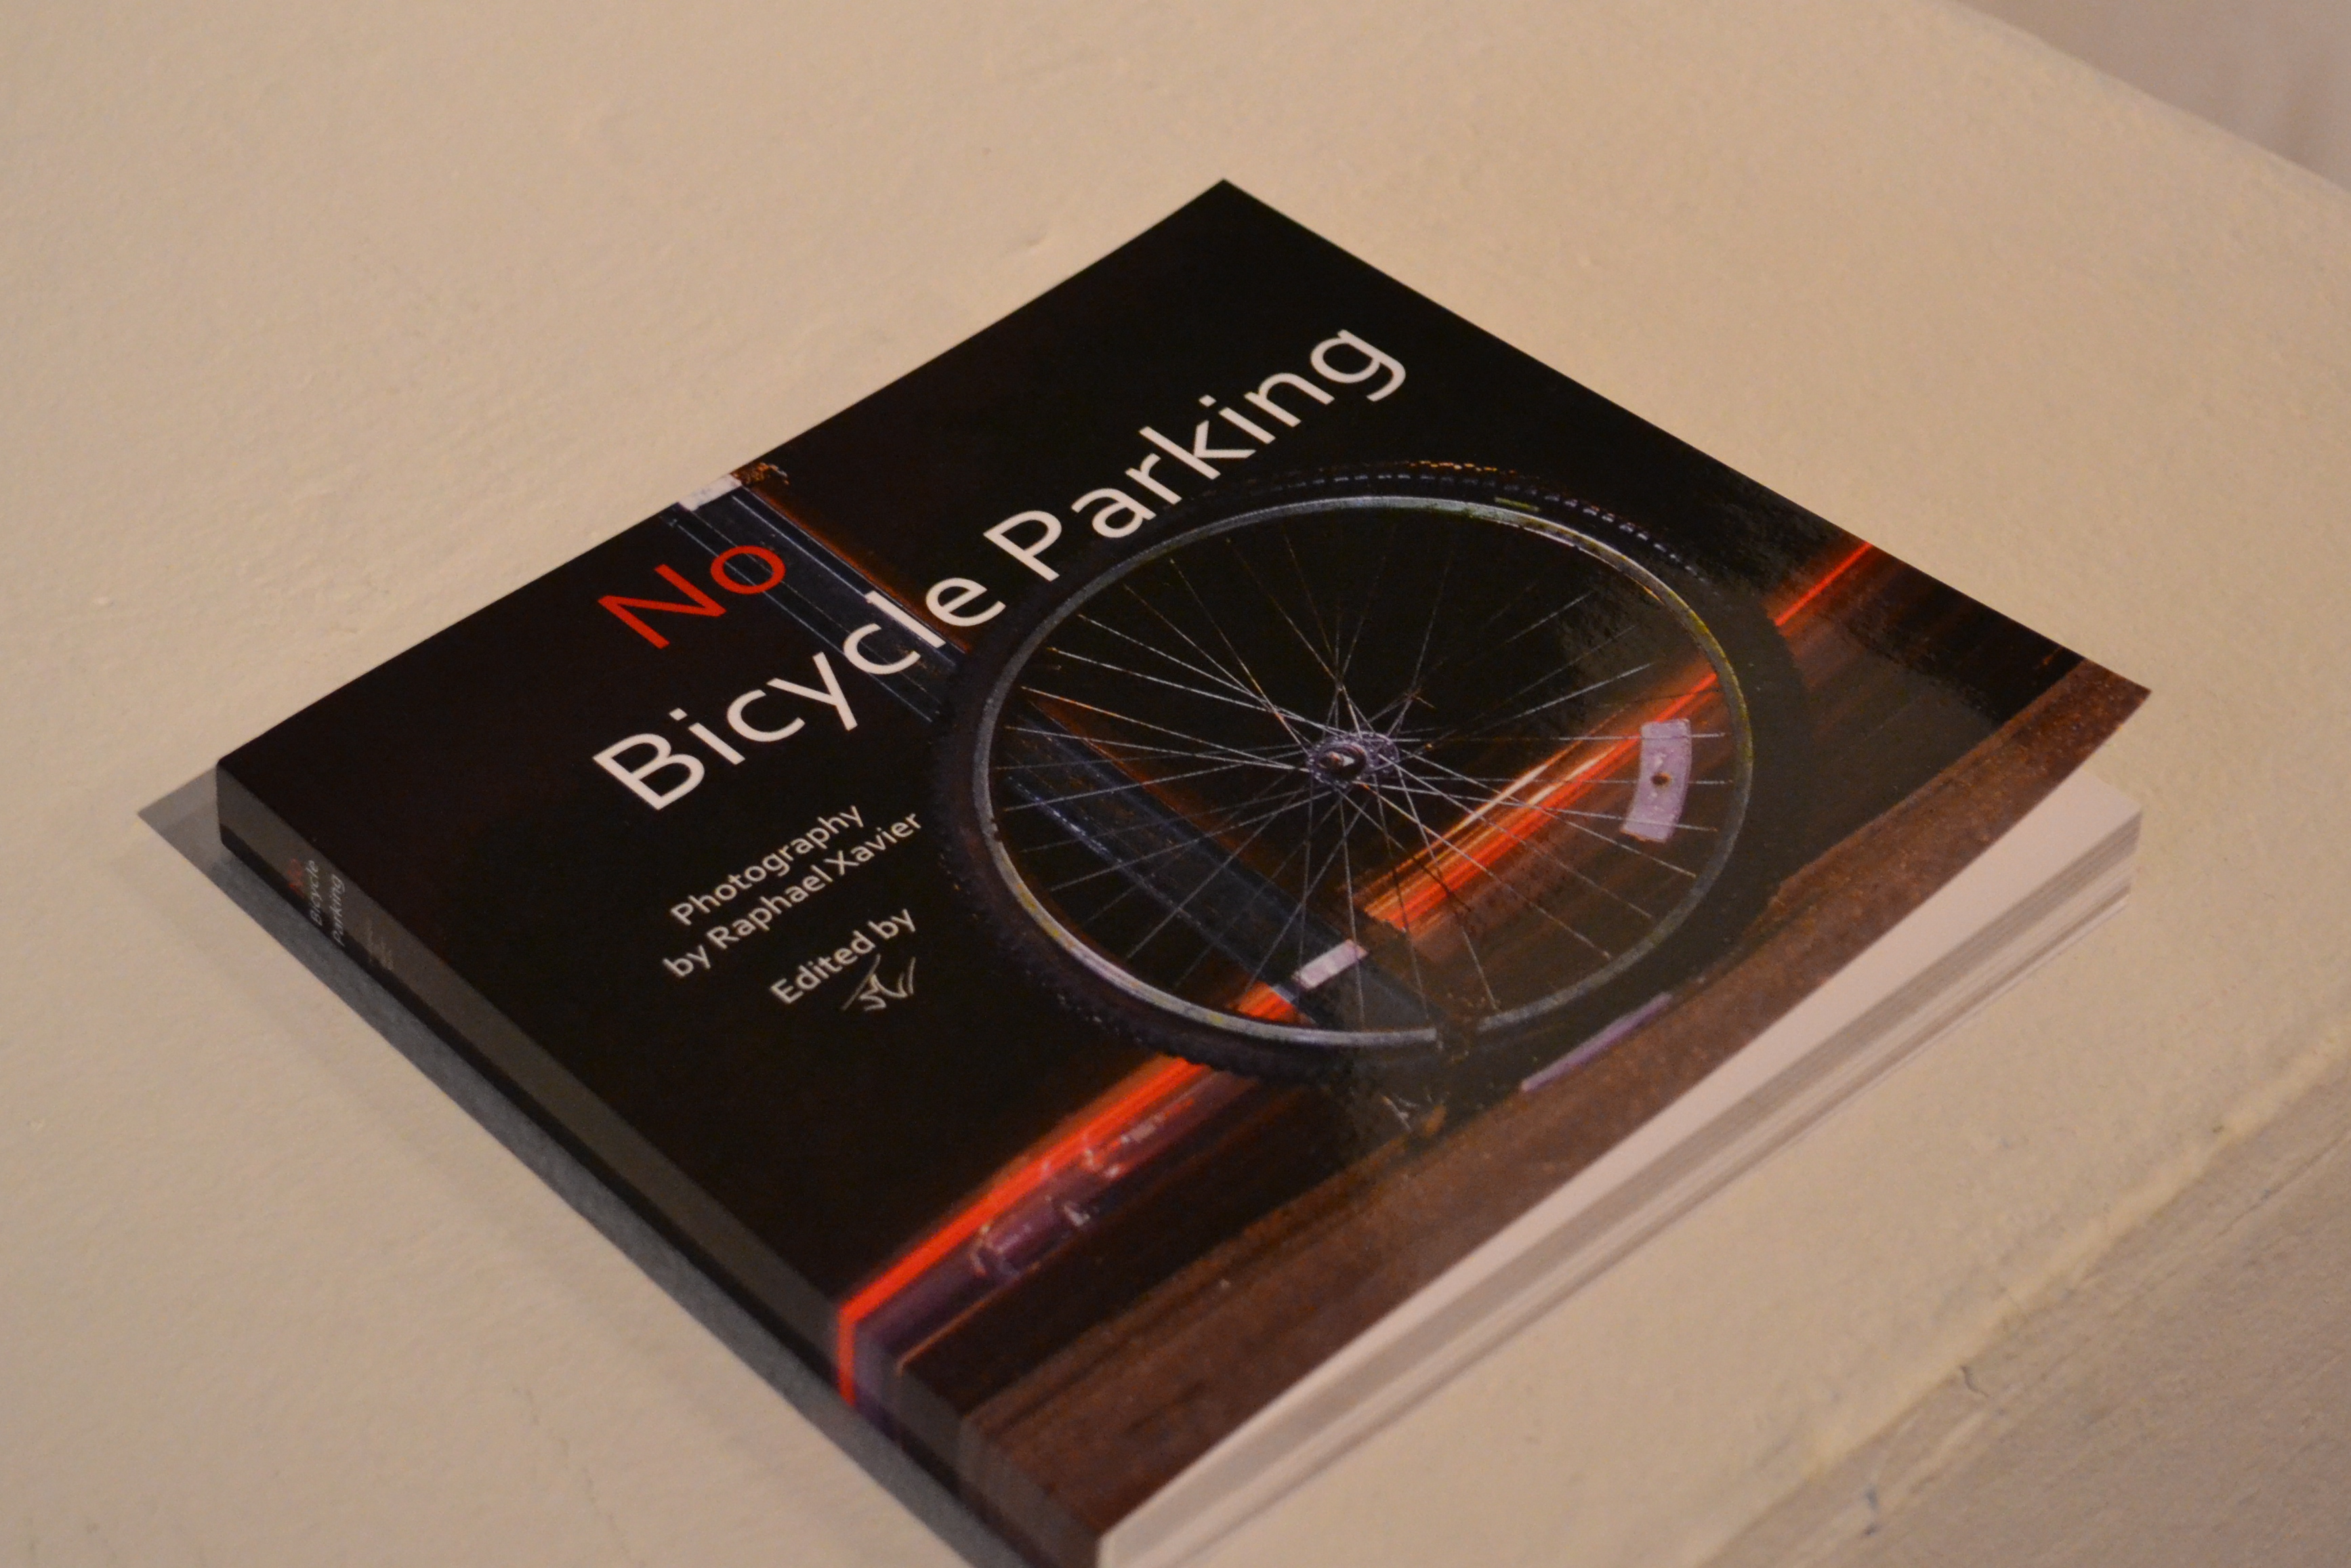 Xavier has printed a sample No Bicycle Parking book, but he plans to add more photos and personal stories